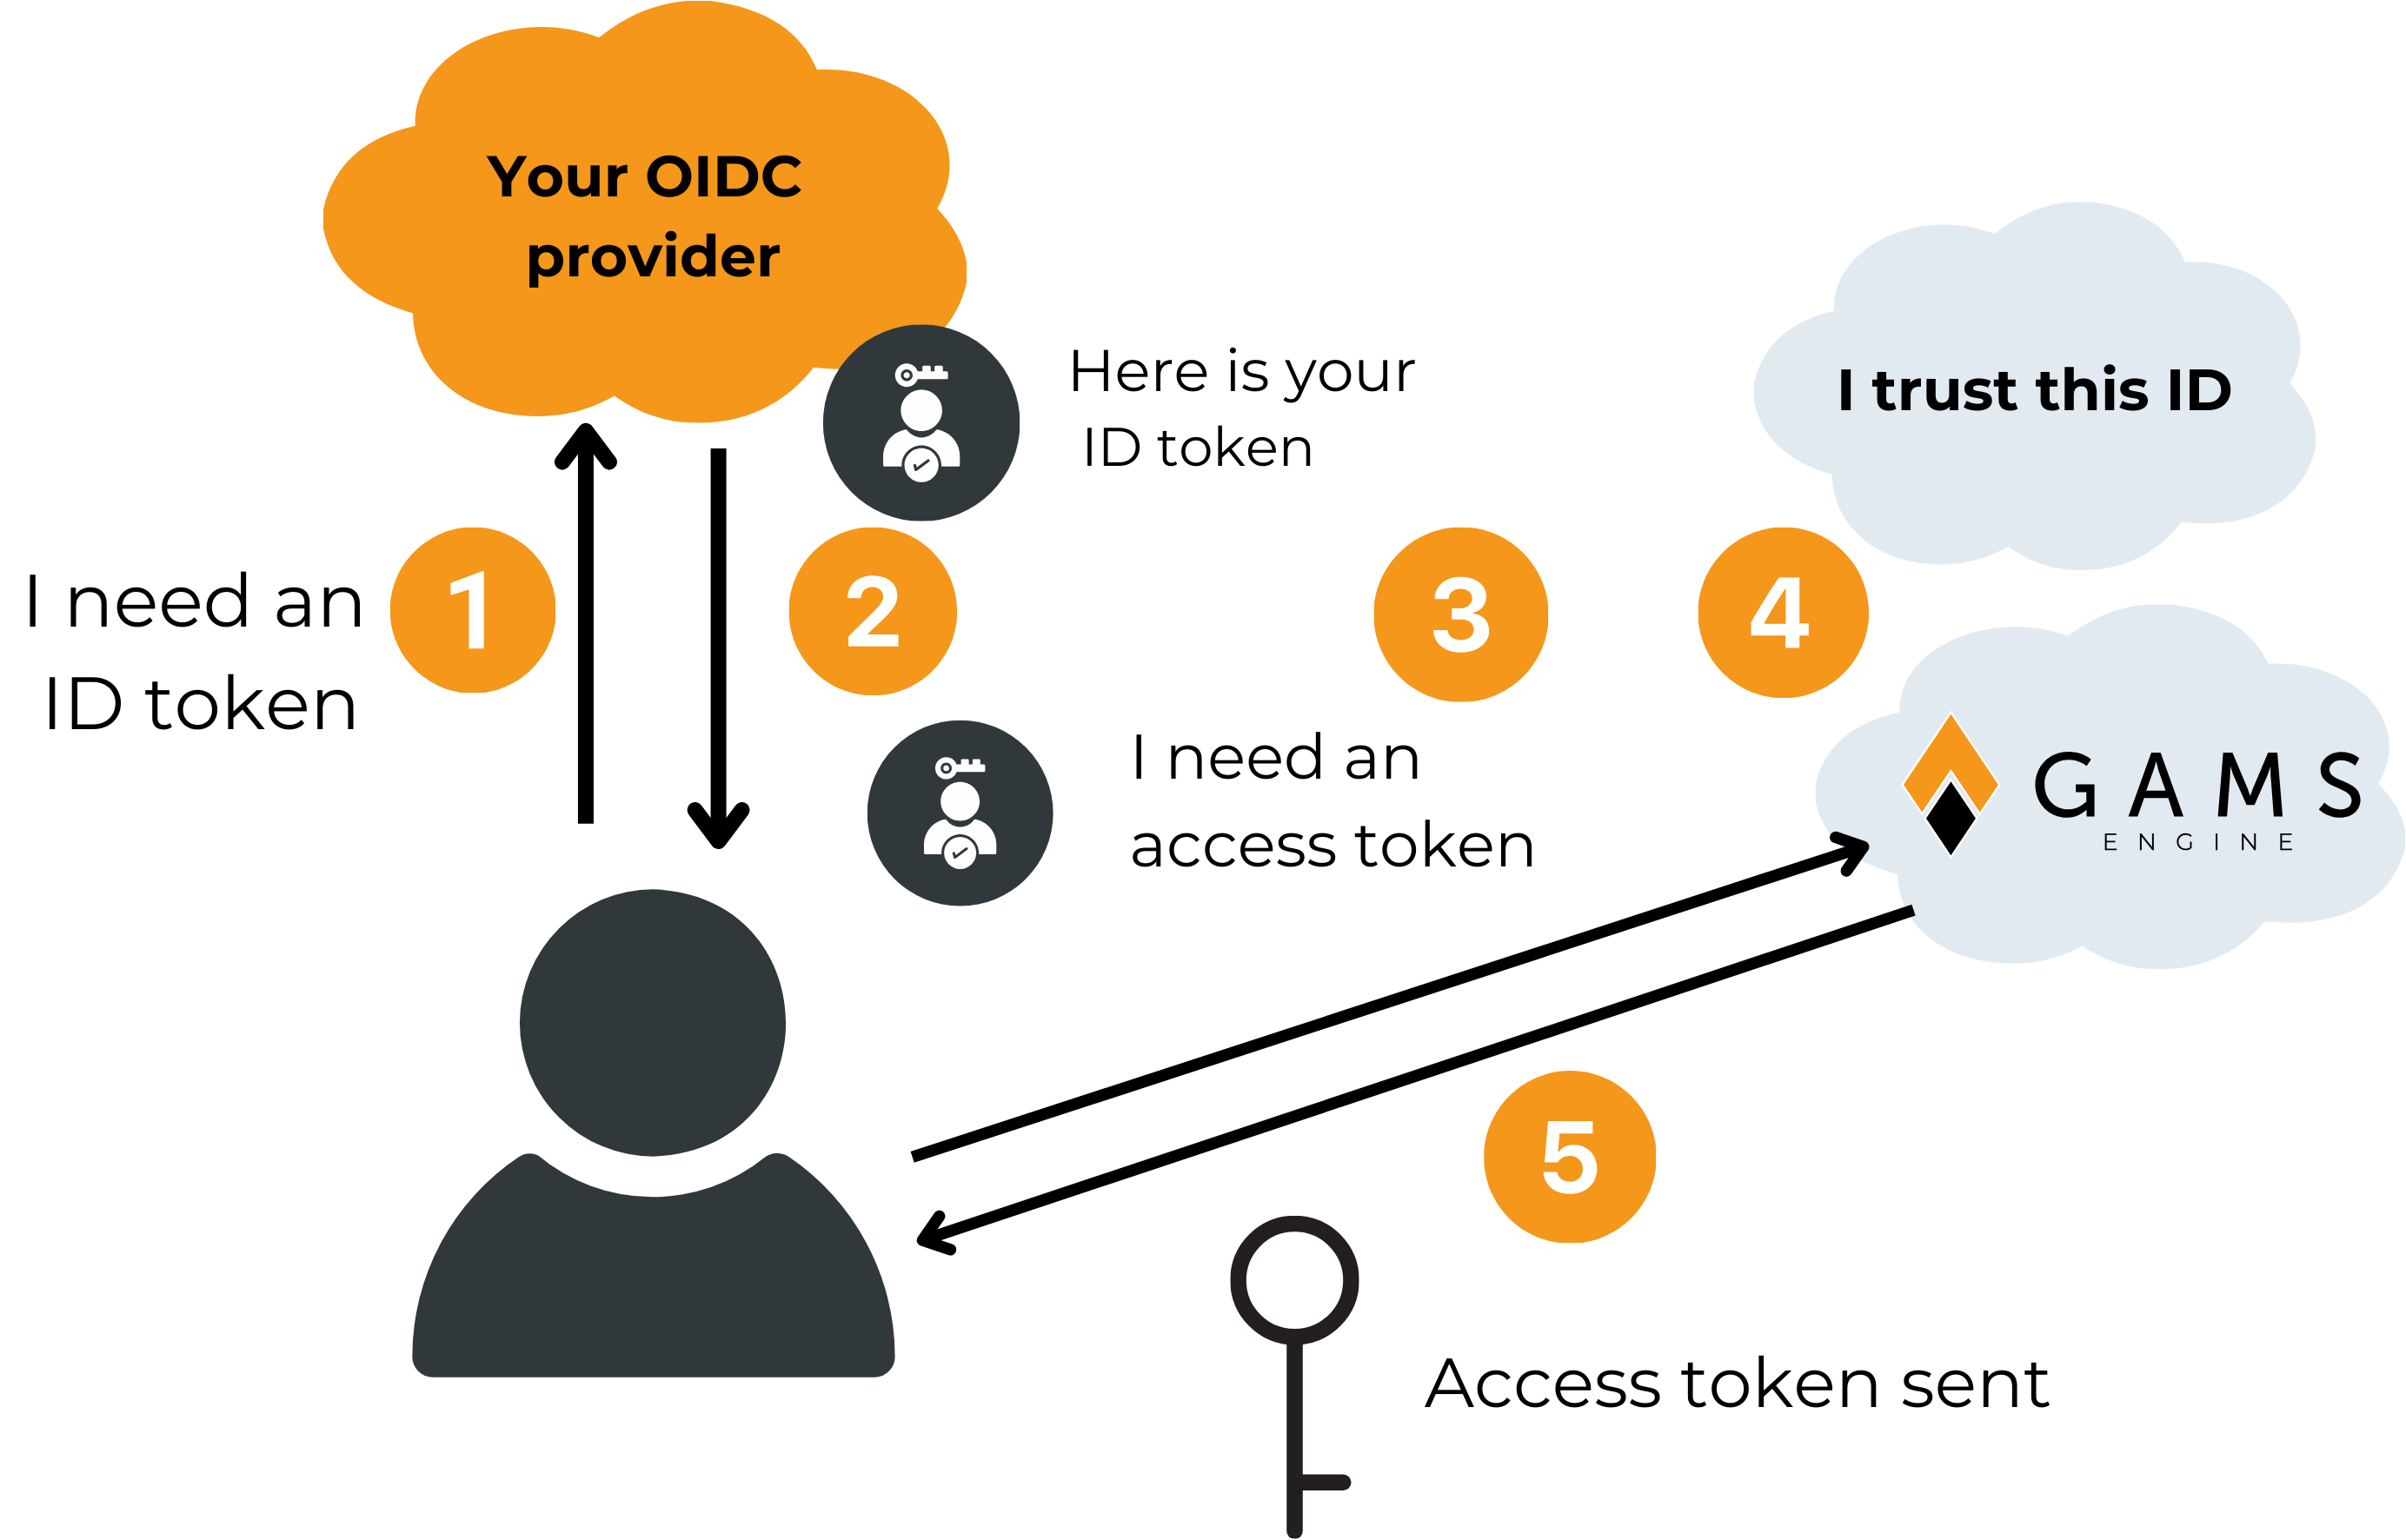 Fig 1. Authentication process using OpenID Connect. (1) a user requests an ID token from their company&rsquo;s OIDC provider. If the provider knows the user, it will send a valid ID token to the user (2). This token is then sent to GAMS Engine to request an access token (3). If the user account exists in GAMS Engine AND the ID token is valid (4), Engine will send an access token back to the user (5). The user can now use this access token when communicating with GAMS Engine.